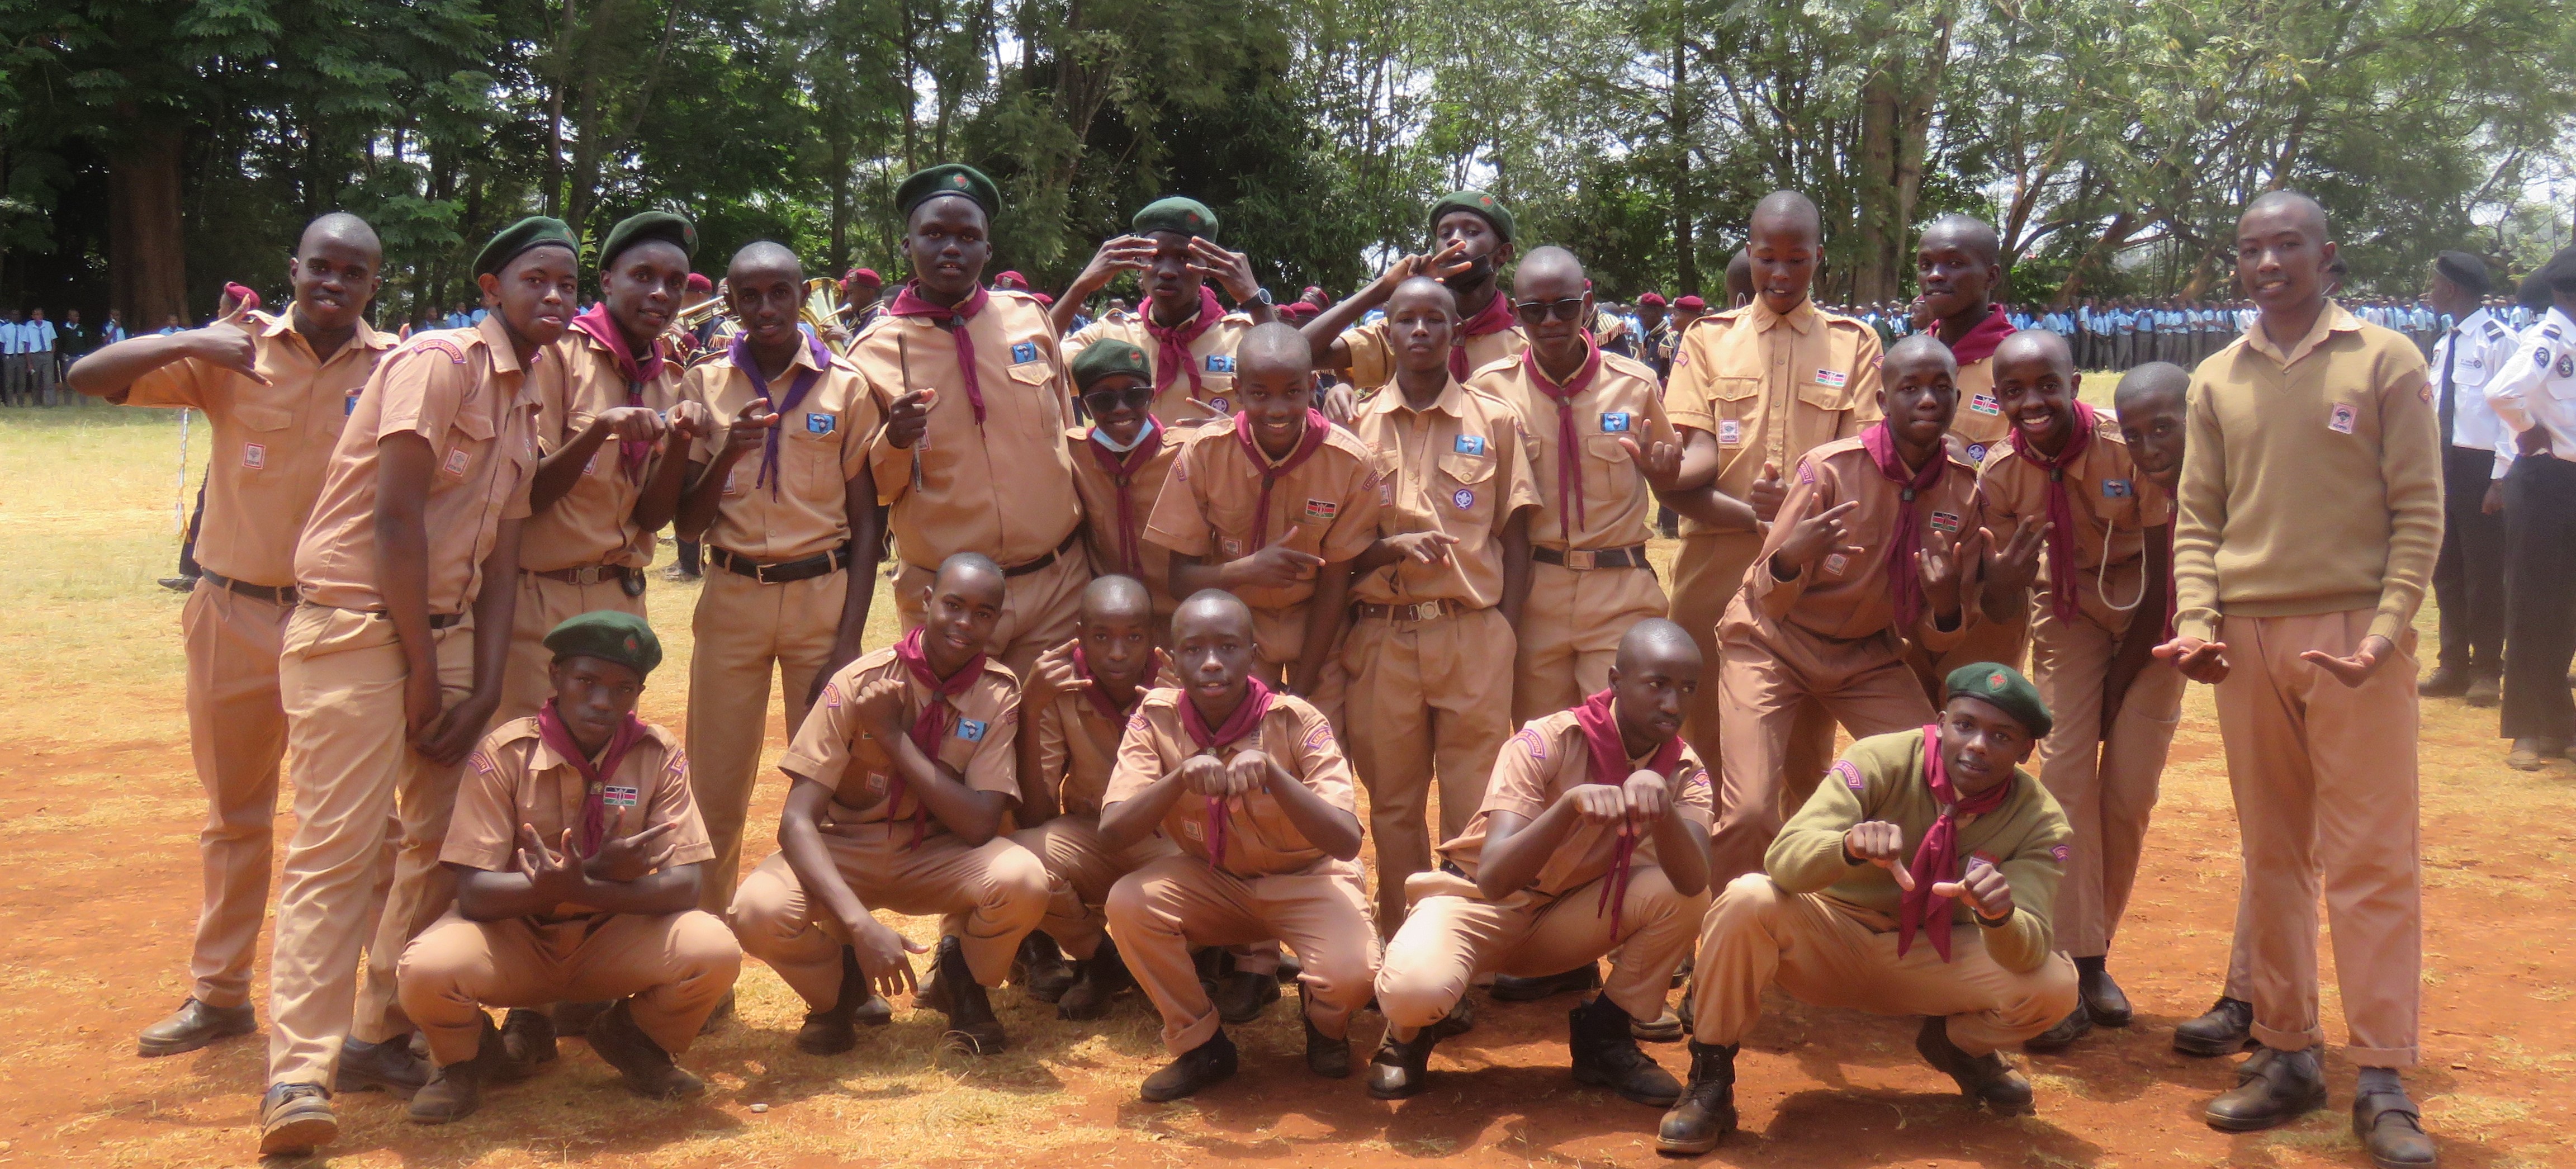 Through recreation, Scouting helps to achieve its purpose of developing young people physically, intellectually, socially, and spiritually. Scouts Build a sense of Confidence, self-esteem, learning life skills, leadership skills, team work an a sense of adventure.